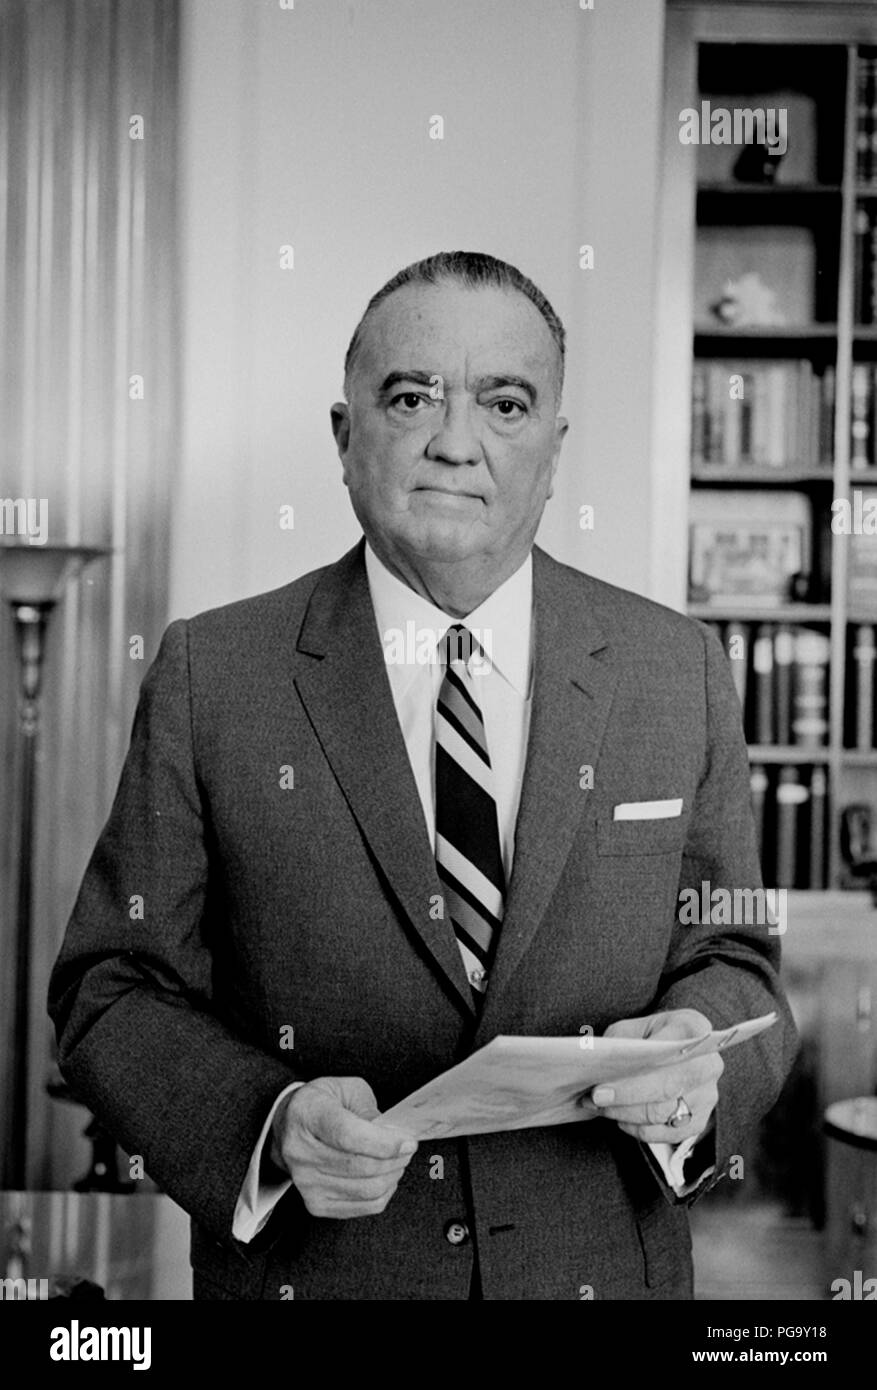 John Edgar Hoover (January 1, 1895 – May 2, 1972) was an American law enforcement administrator and the first Director of the Federal Bureau of Investigation (FBI) of the United States. He was appointed as the director of the Bureau of Investigation –the FBI's predecessor – in 1924 and was instrumental in founding the FBI in 1935, where he remained director for over 37 years until his death in 1972 at the age of 77. Hoover has been credited with building the FBI into a larger crime-fighting agency than it was at its inception and with instituting a number of modernizations to police technology Stock Photo